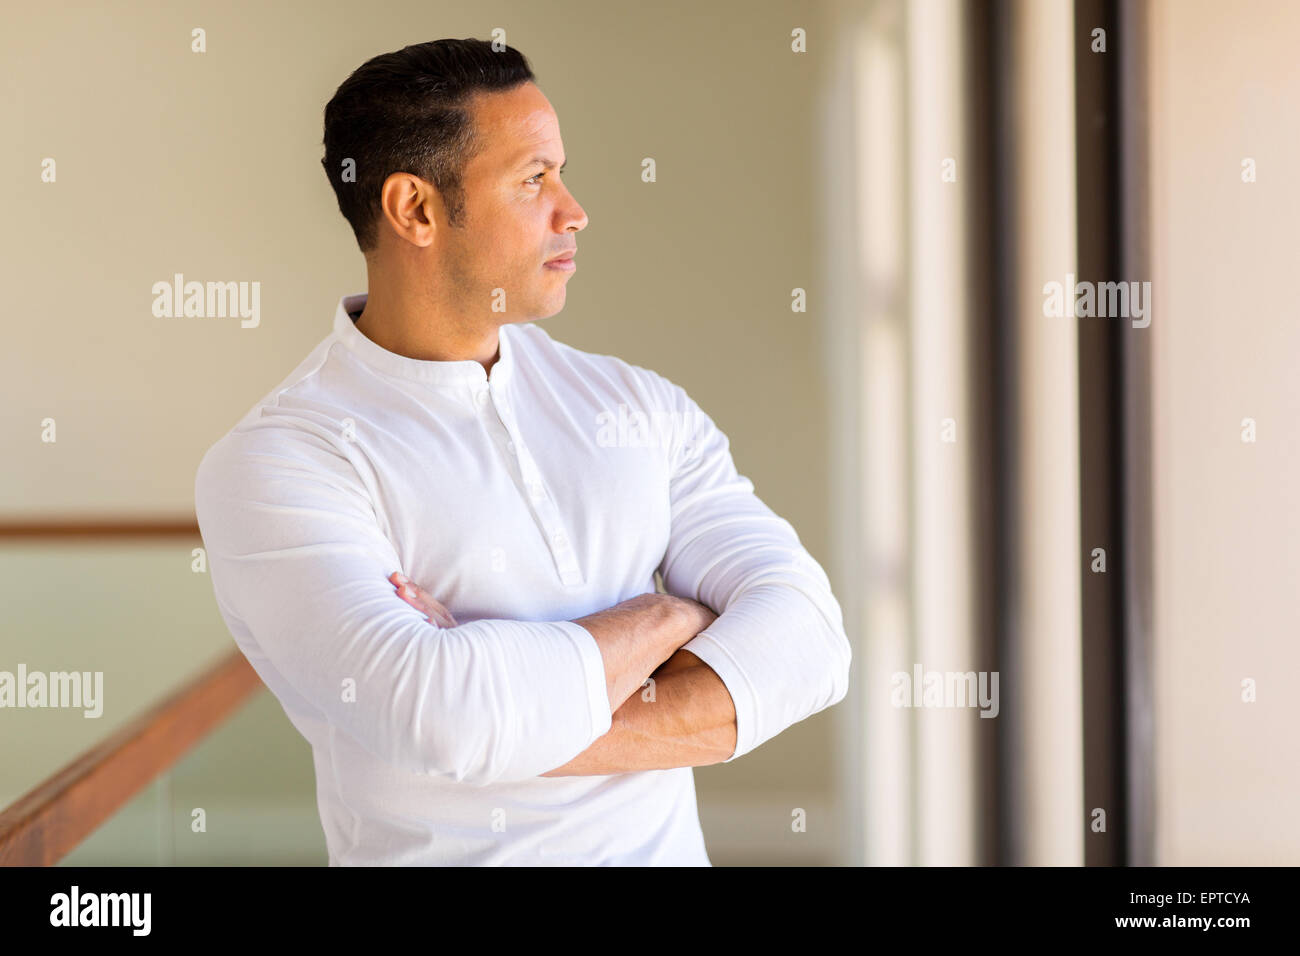 thoughtful mid age man with arms crossed at home Stock Photo